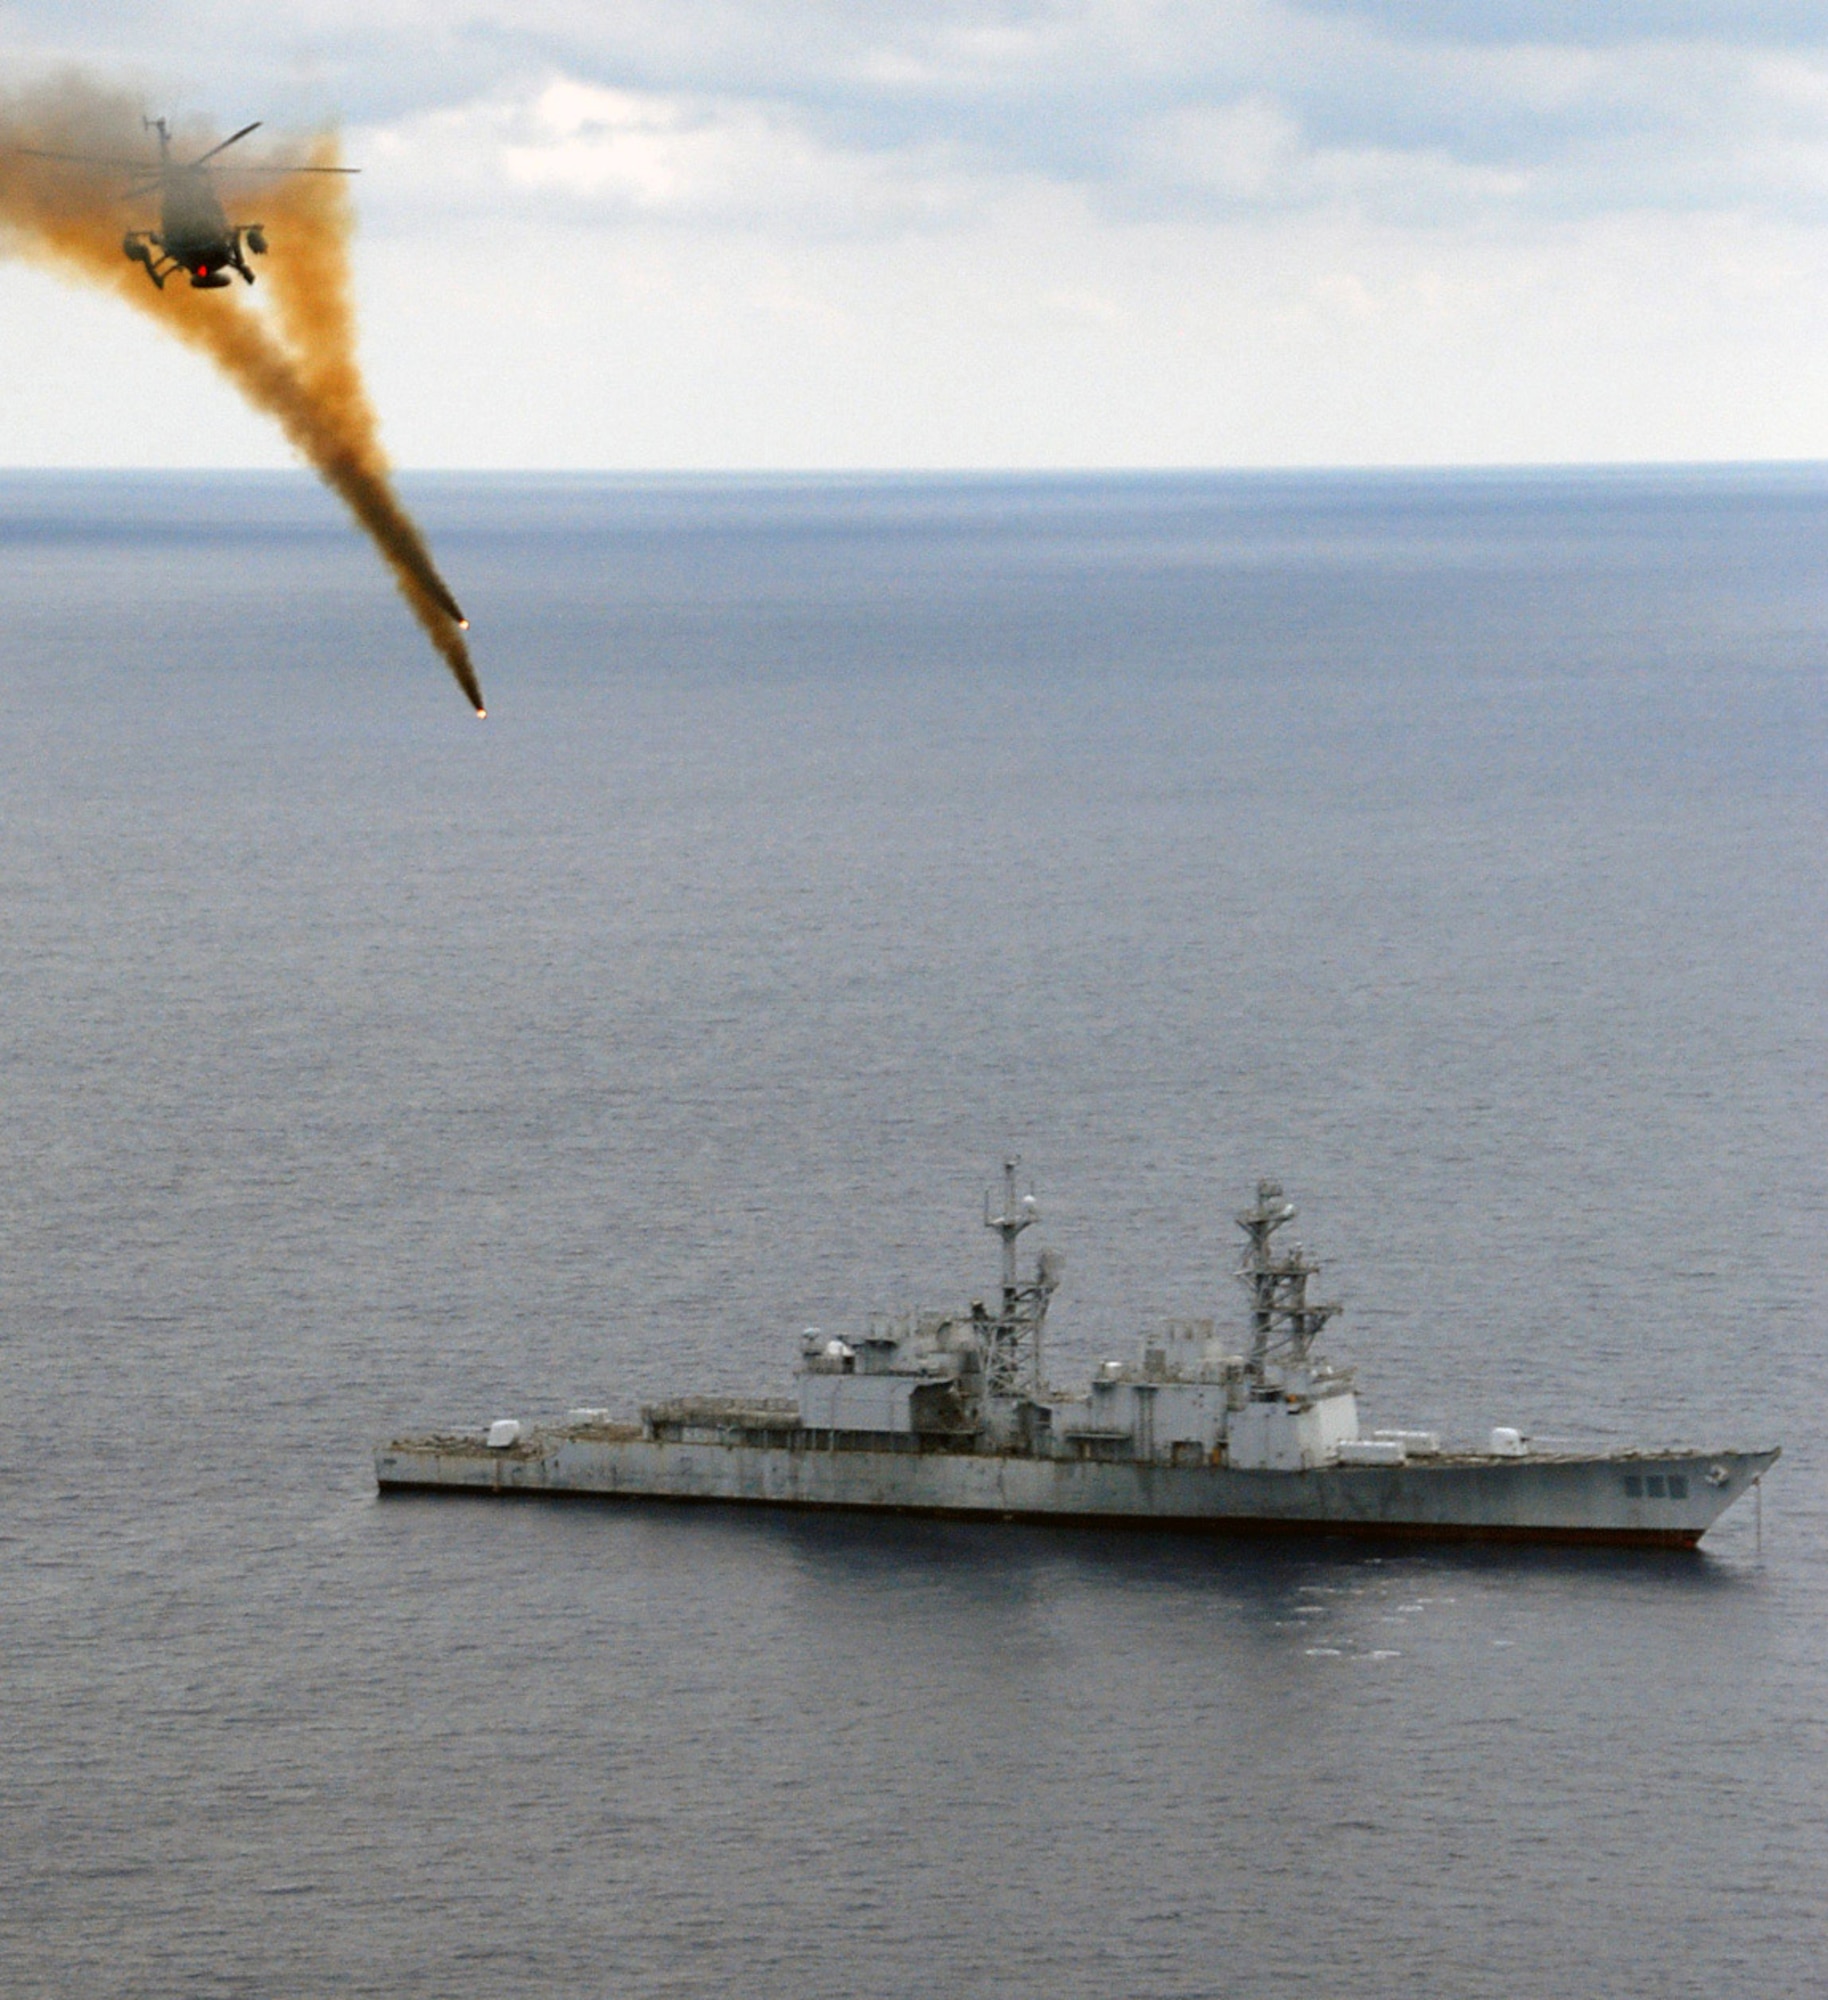 ATLANTIC OCEAN (April 29, 2009) -- A Mexican BO-105 Bolkow helicopter fires 2.75" high explosive rockets at the ex-USS Connolly (DD 979) during the sinking exercise portion of UNITAS Gold. This year marks the 50th iteration of UNITAS, a multinational exercise that provides opportunities for participating nations to increase their collective ability counter illicit maritime activities that threaten regional stability. Participating countries are Brazil, Canada, Chile, Colombia, Ecuador, Germany, Mexico, Peru,the United States and Uruguay. U.S. Navy Photo by LT Chris Brown)